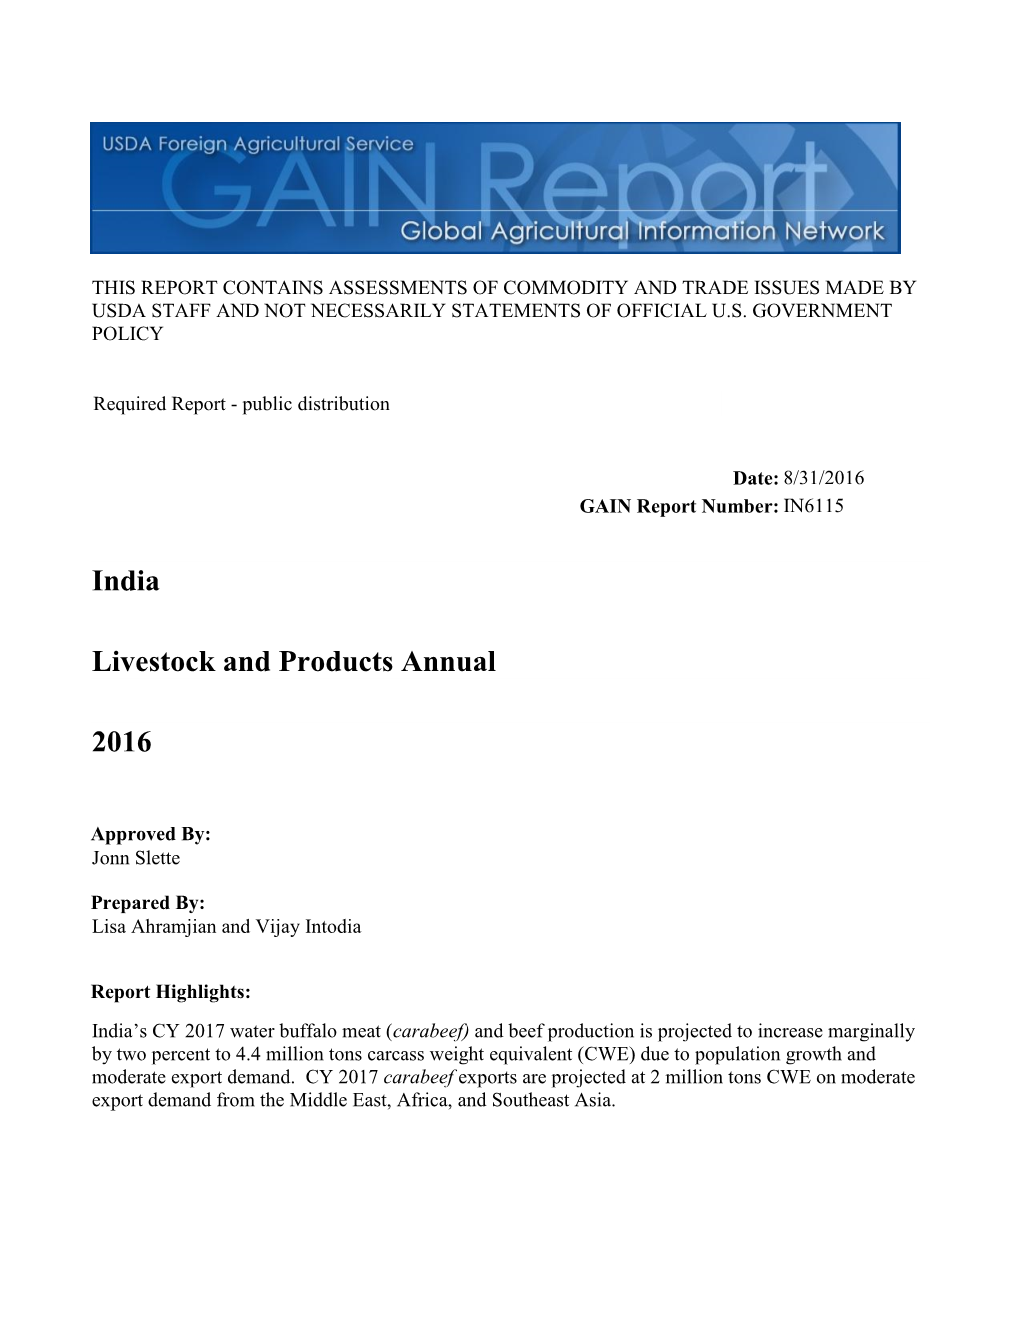 2016 Livestock and Products Annual India